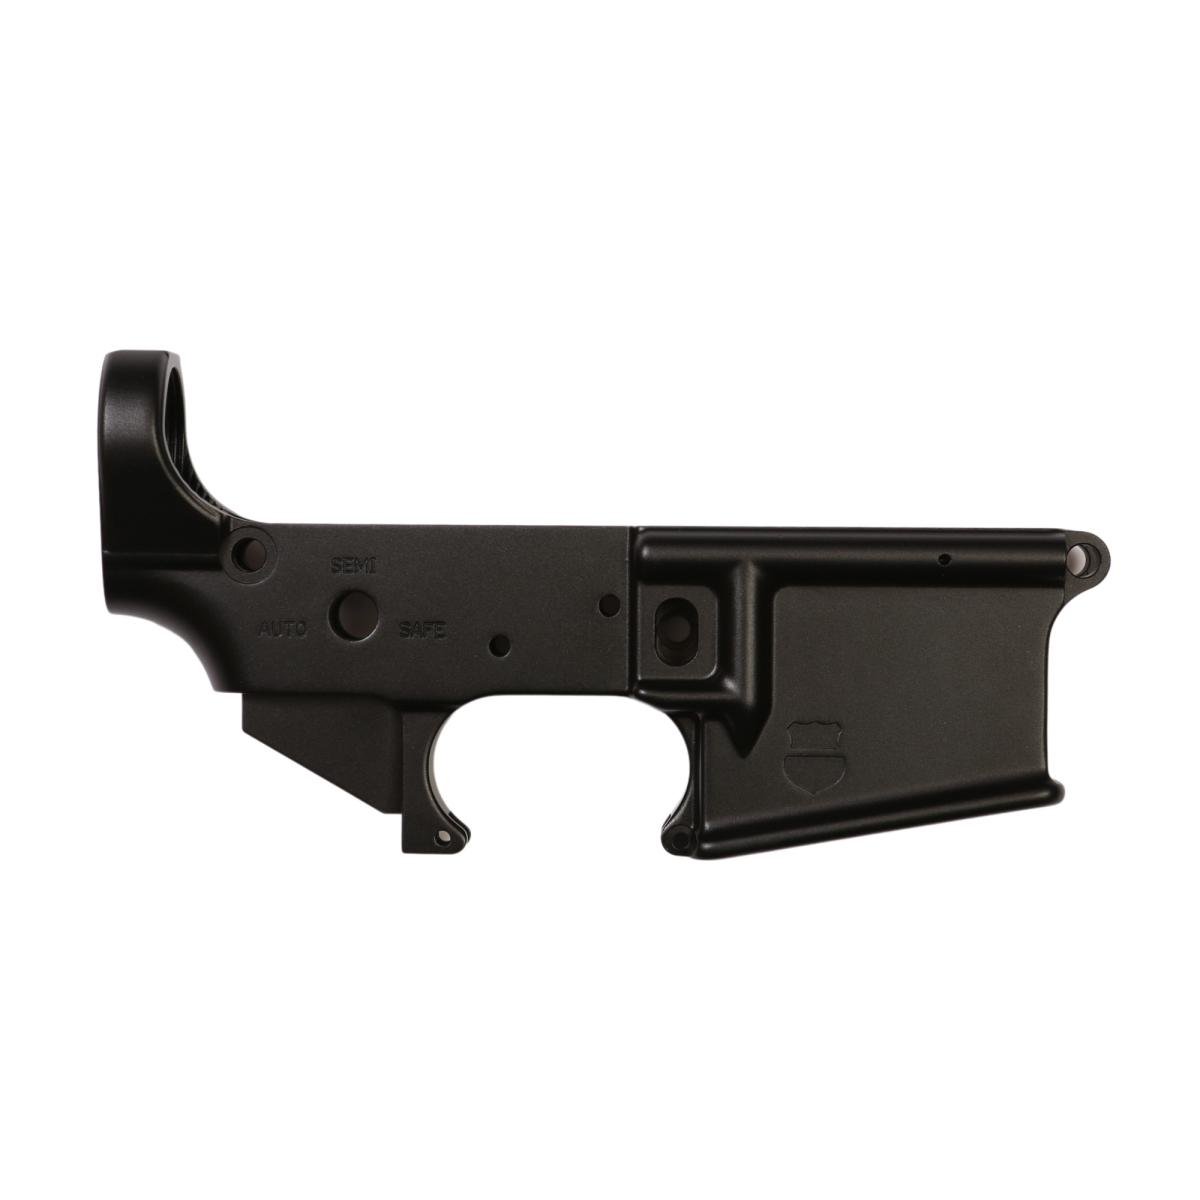 Sons of Liberty Gun Works Loyal 9 Stripped Lower Receiver 223/5.56